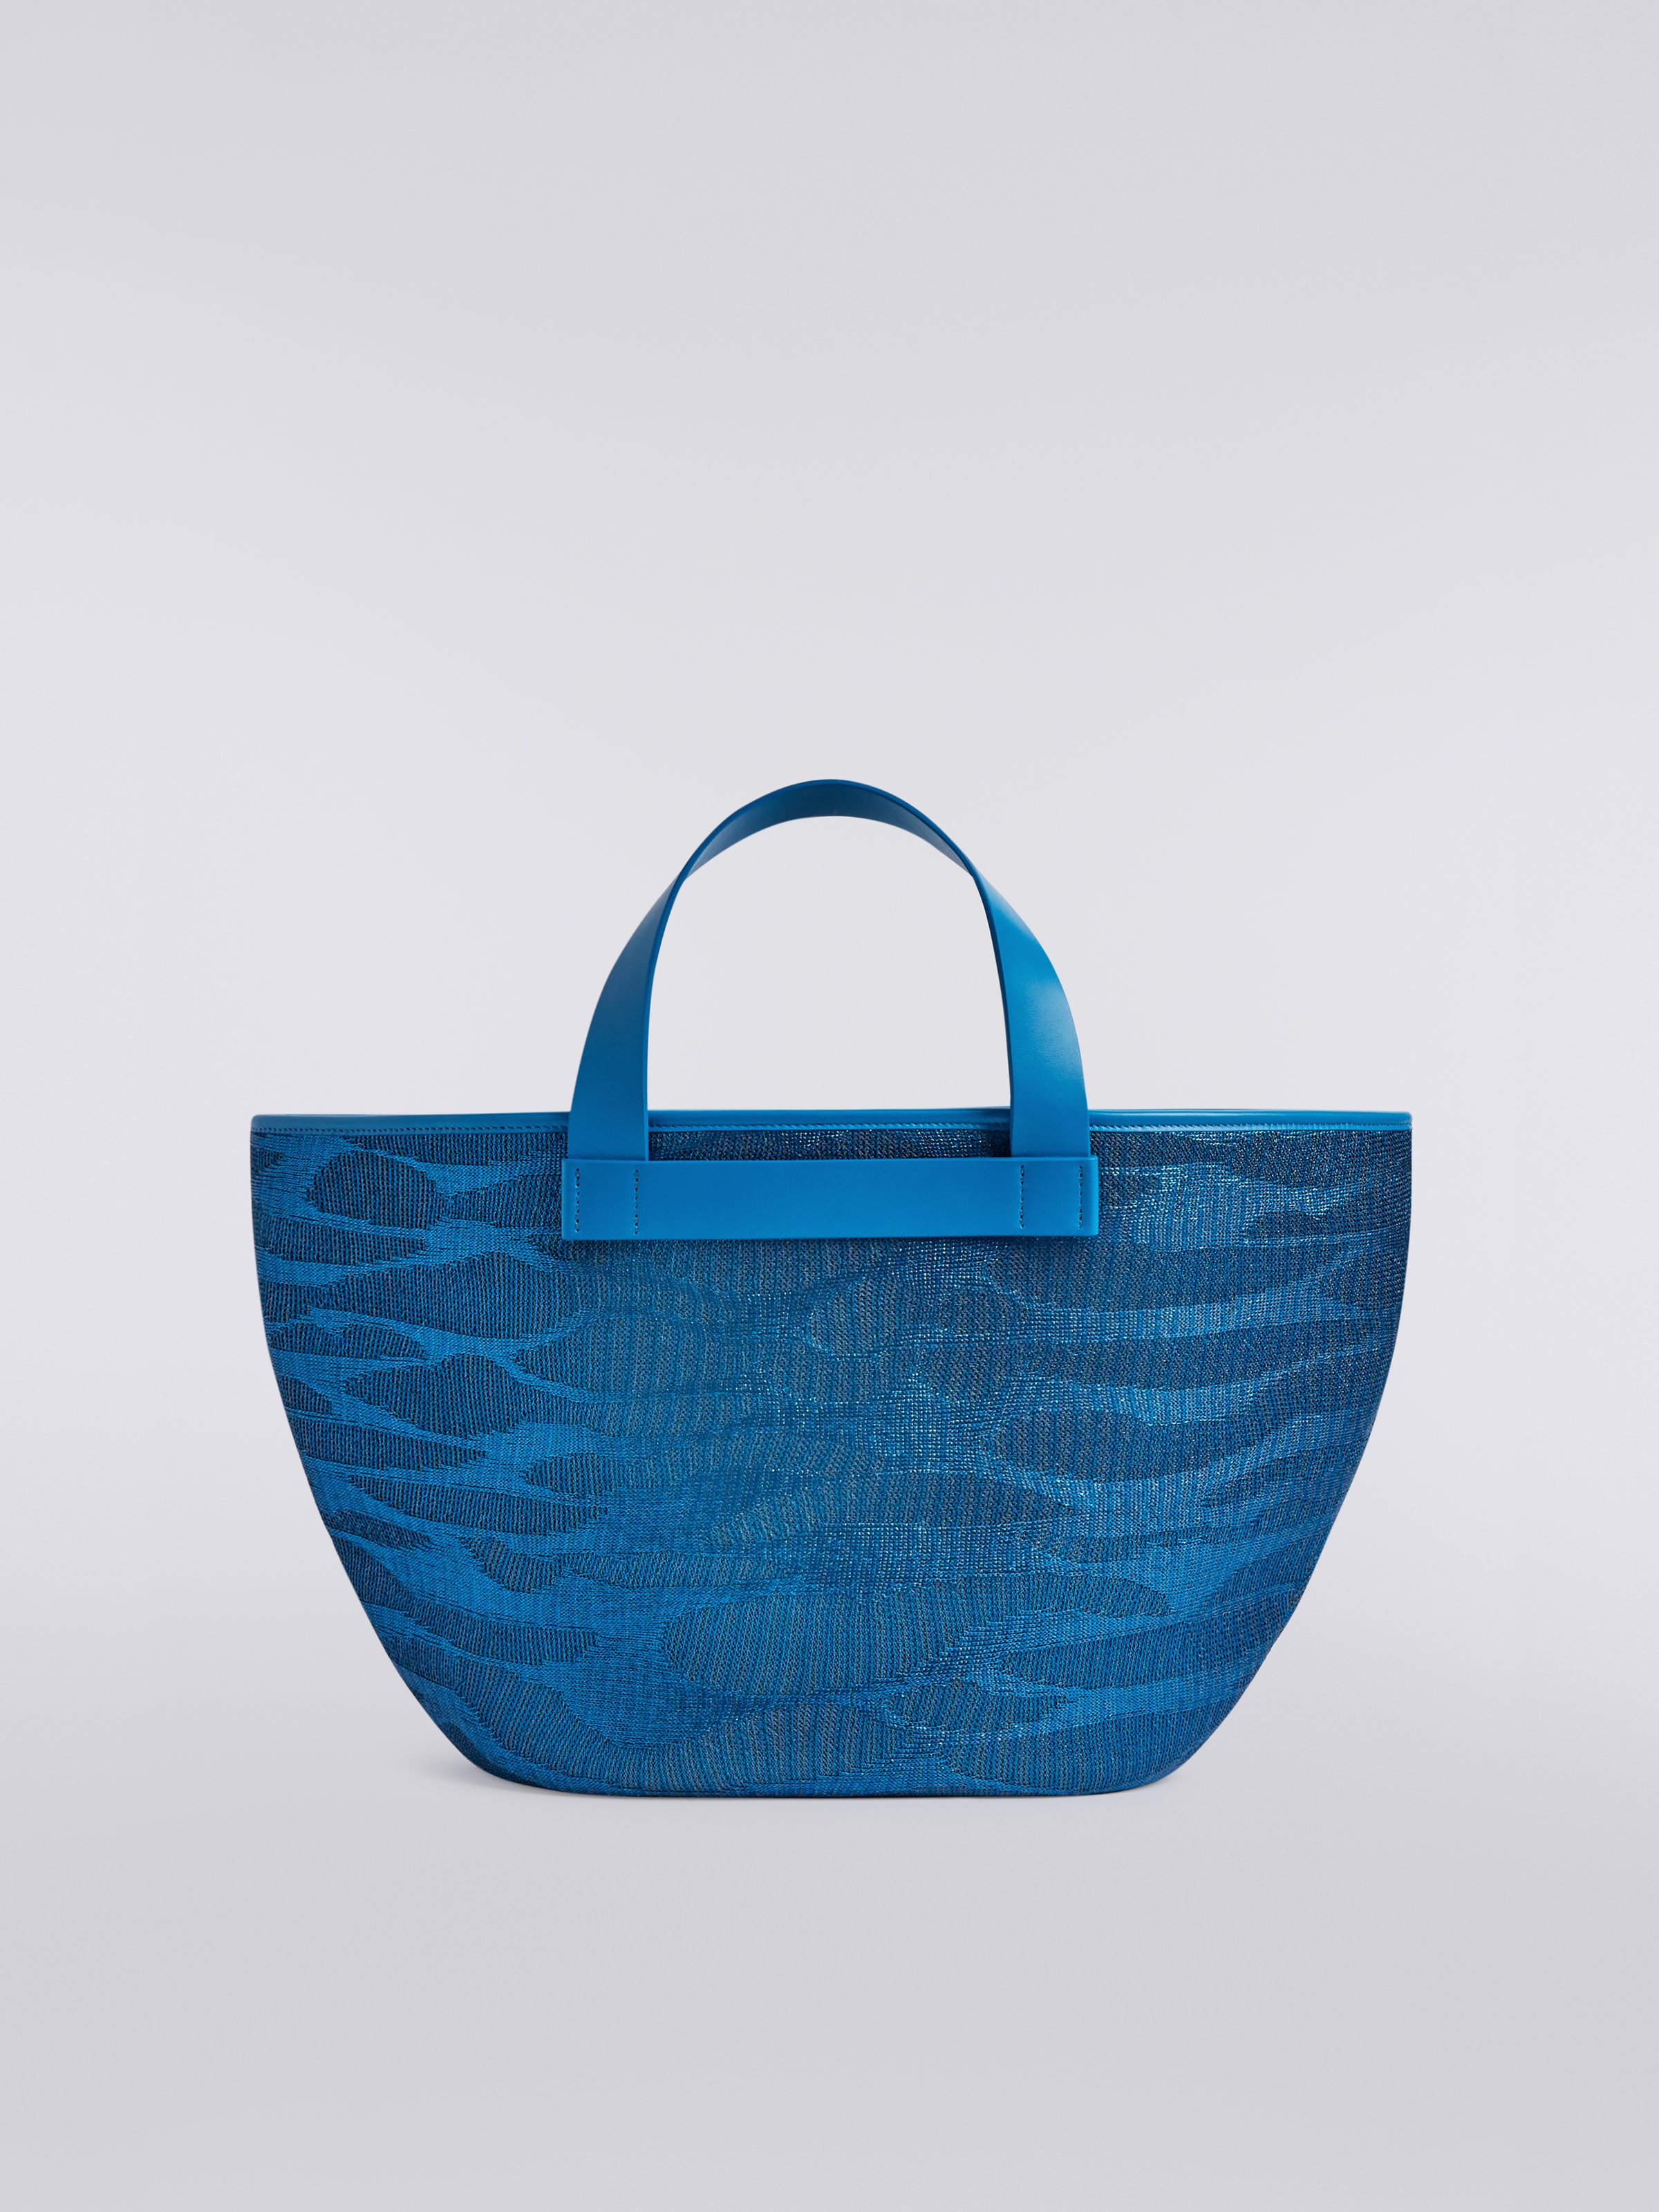 Jacquard viscose knit tote with leather handles, Blue - 2